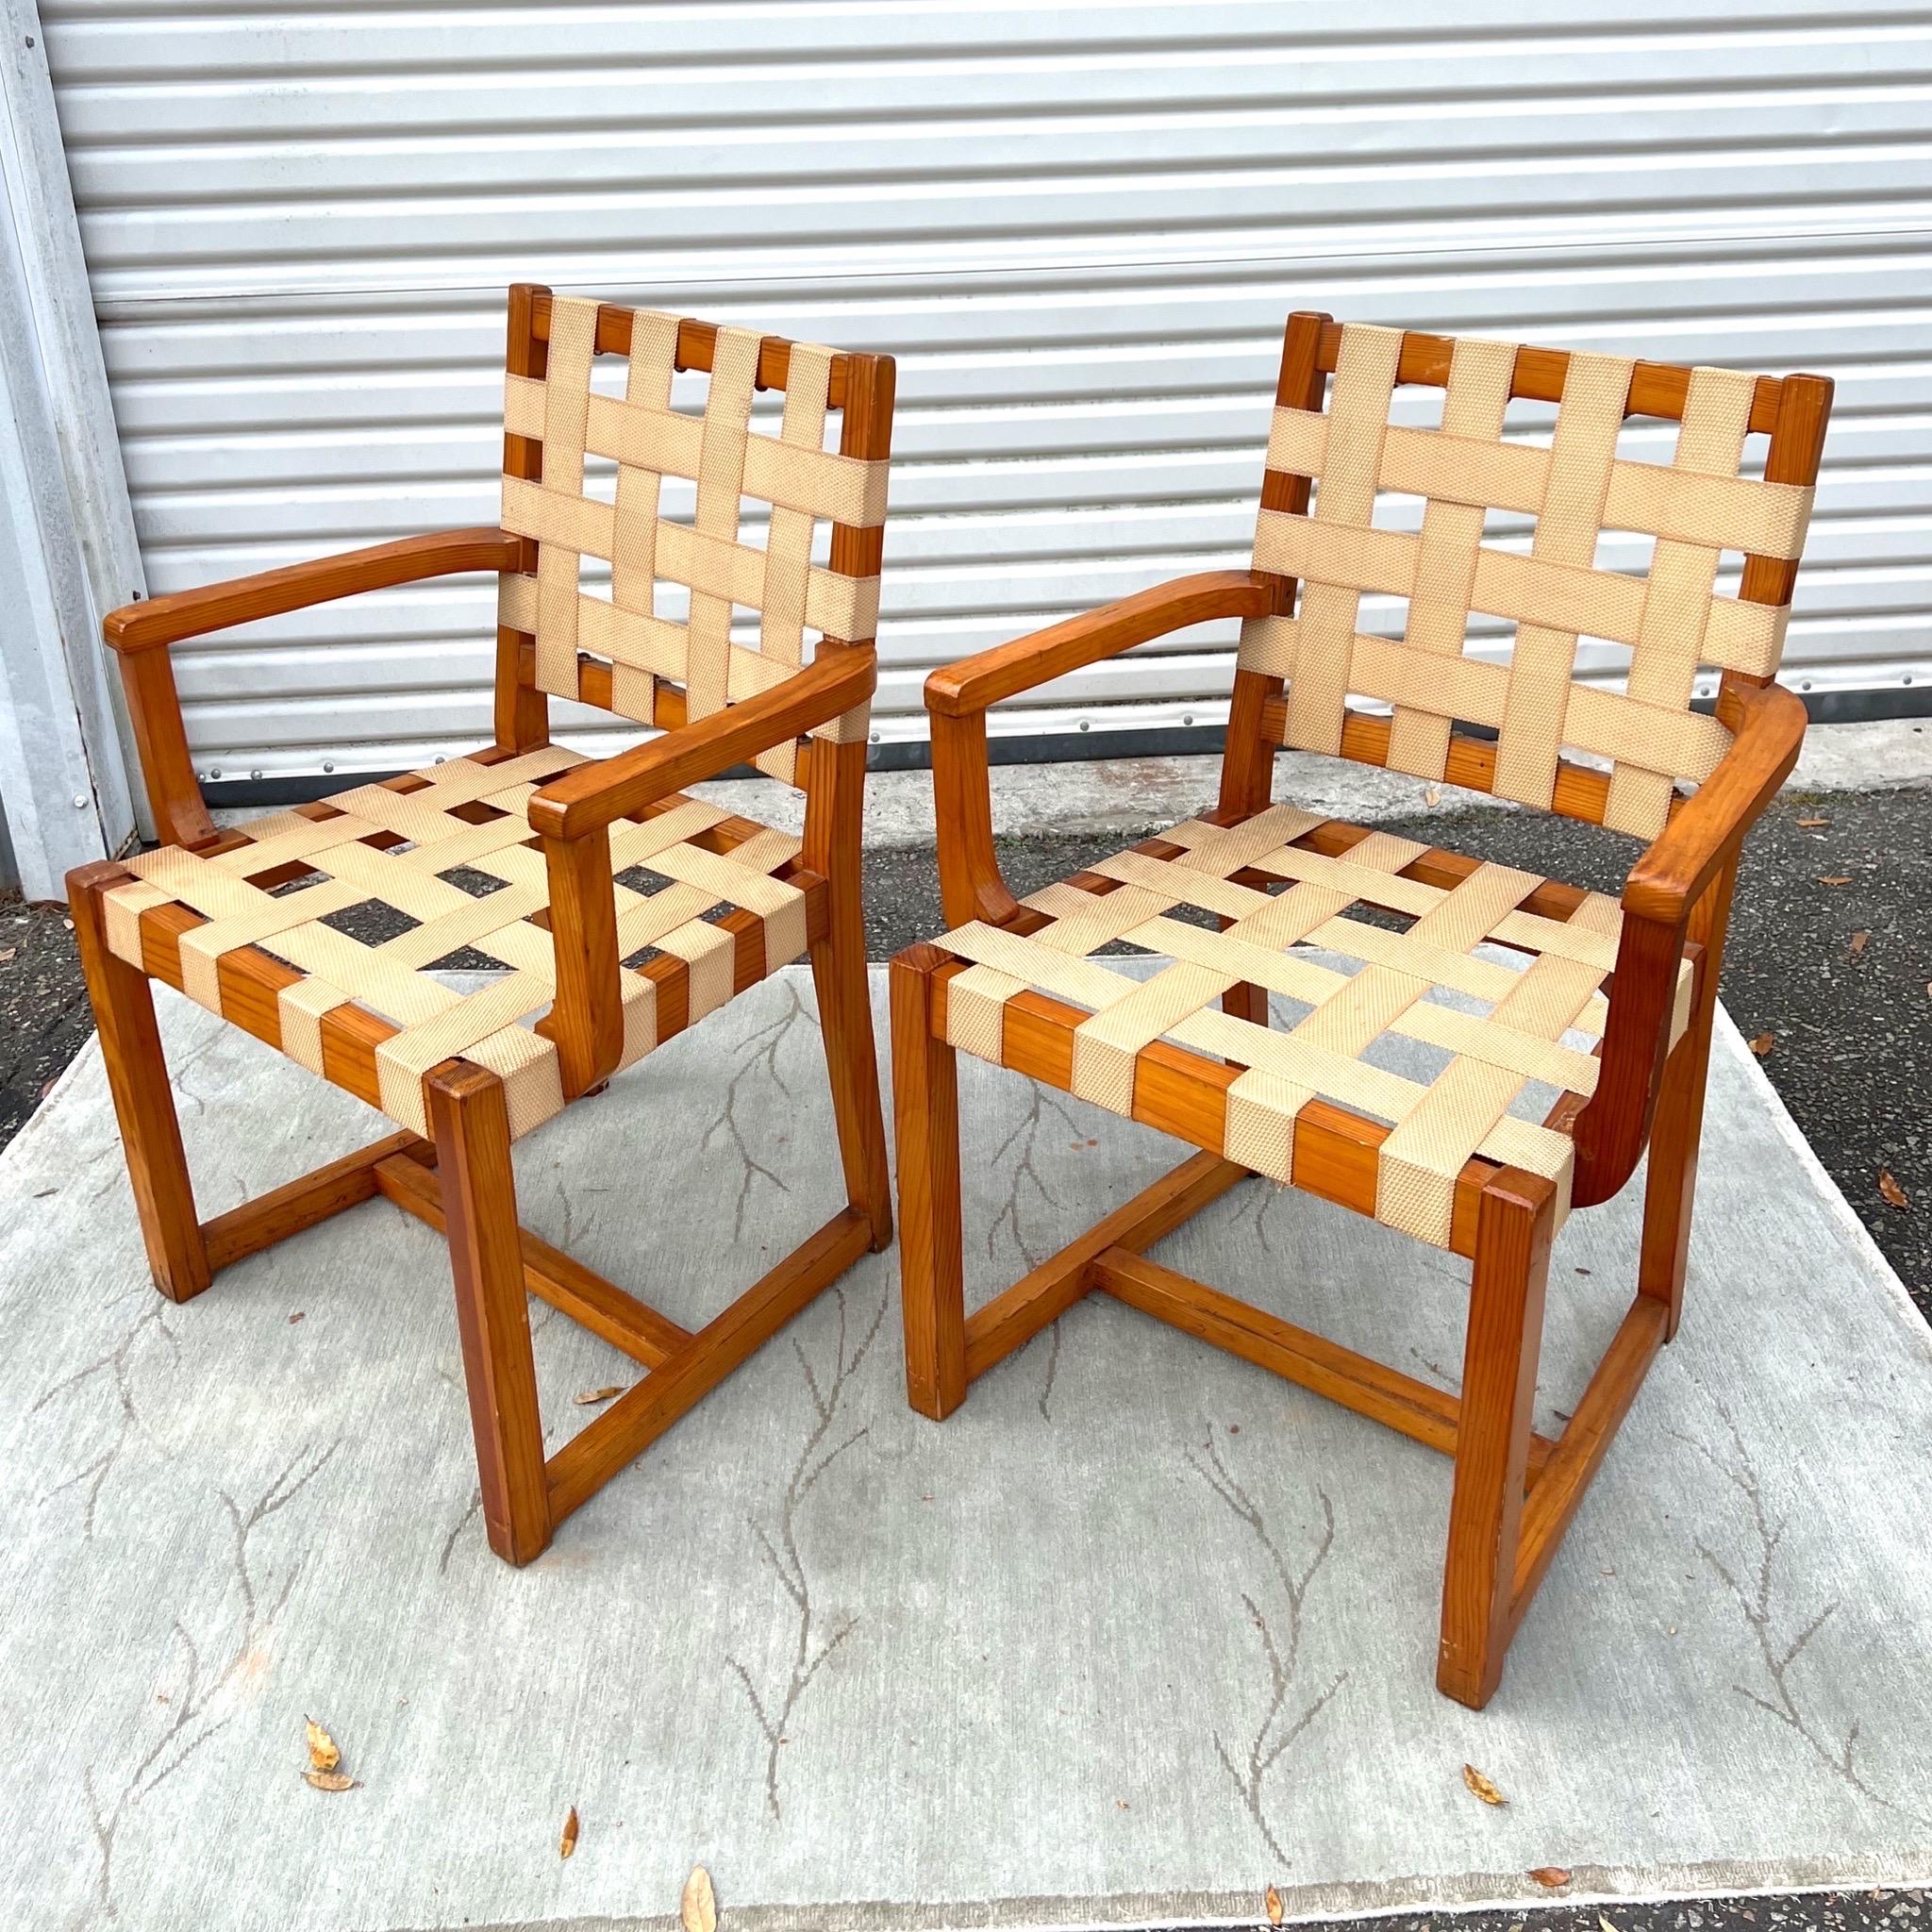 20th Century Set of 4 Midcentury Mexican Woven Arm Chairs by Michael van Beuren